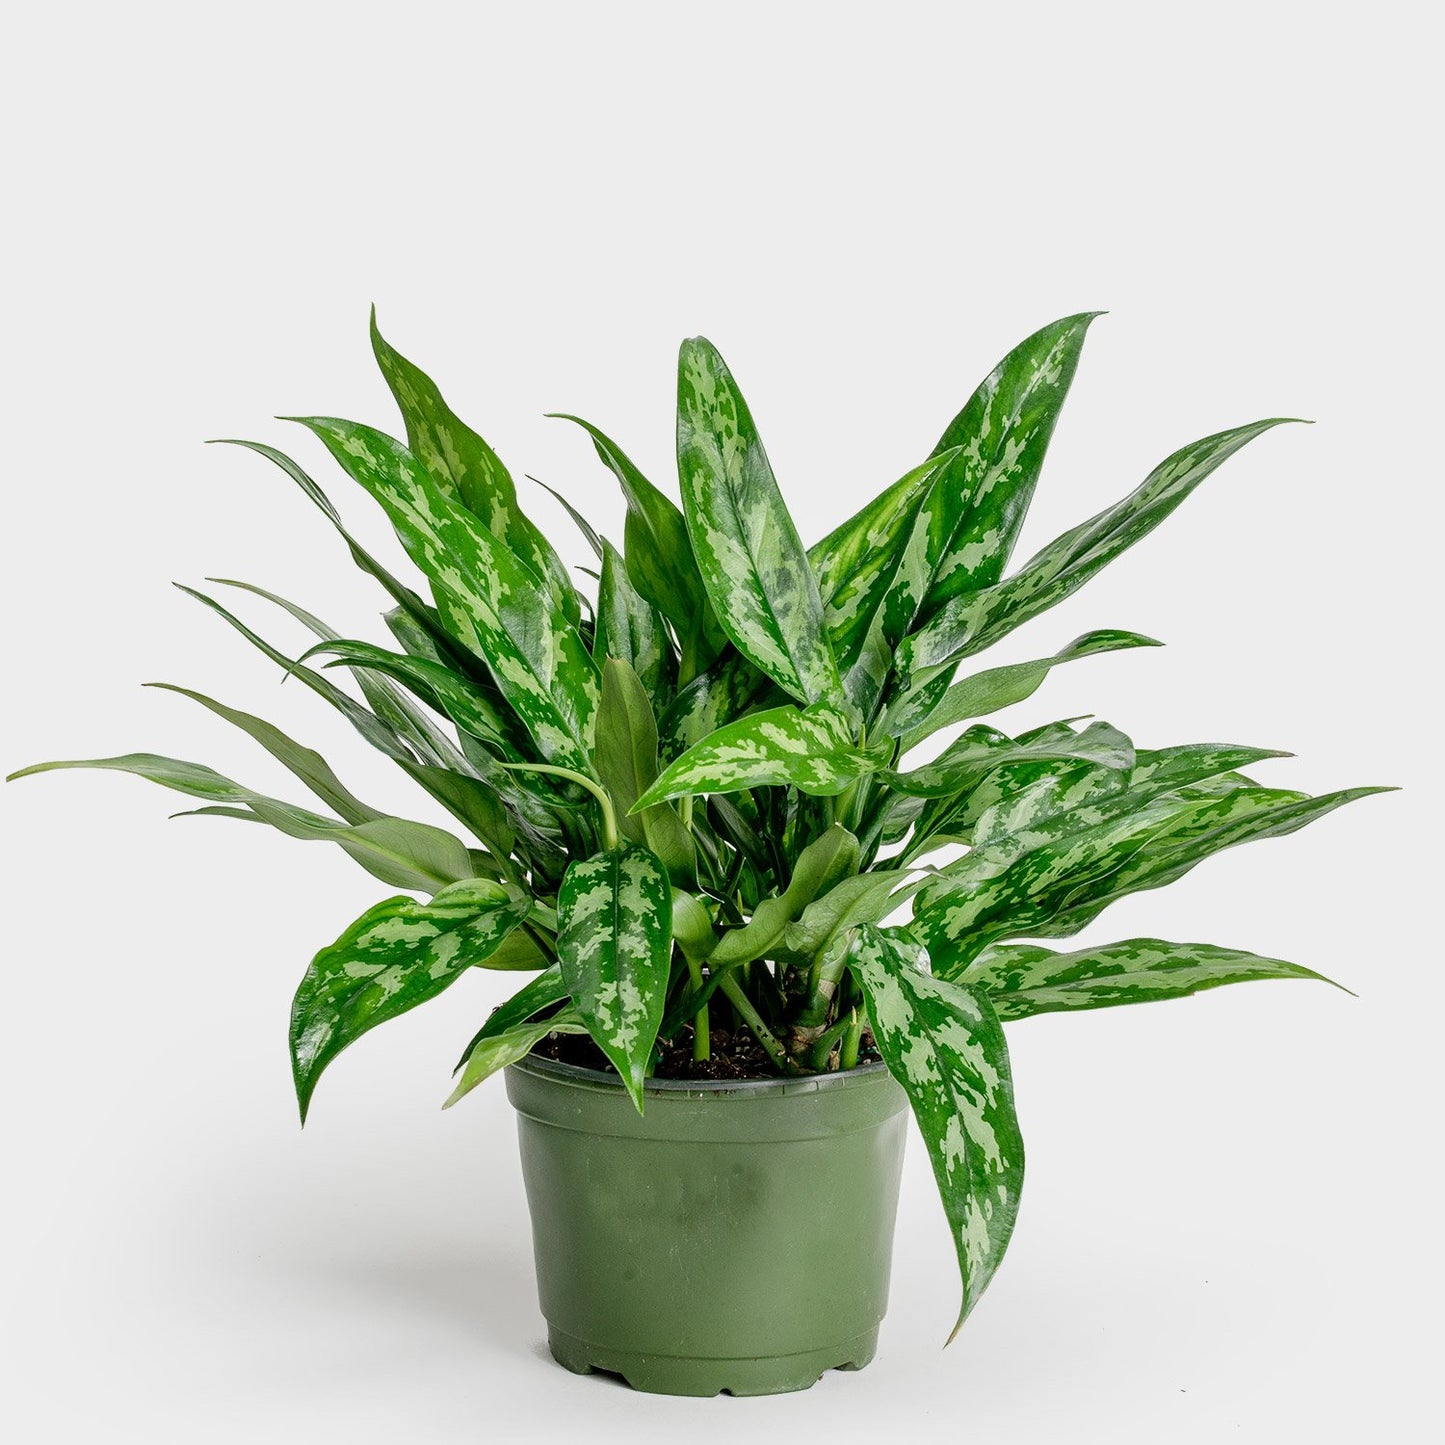 Aglaonema "Chinese Evergreen" Plant - 6" Container